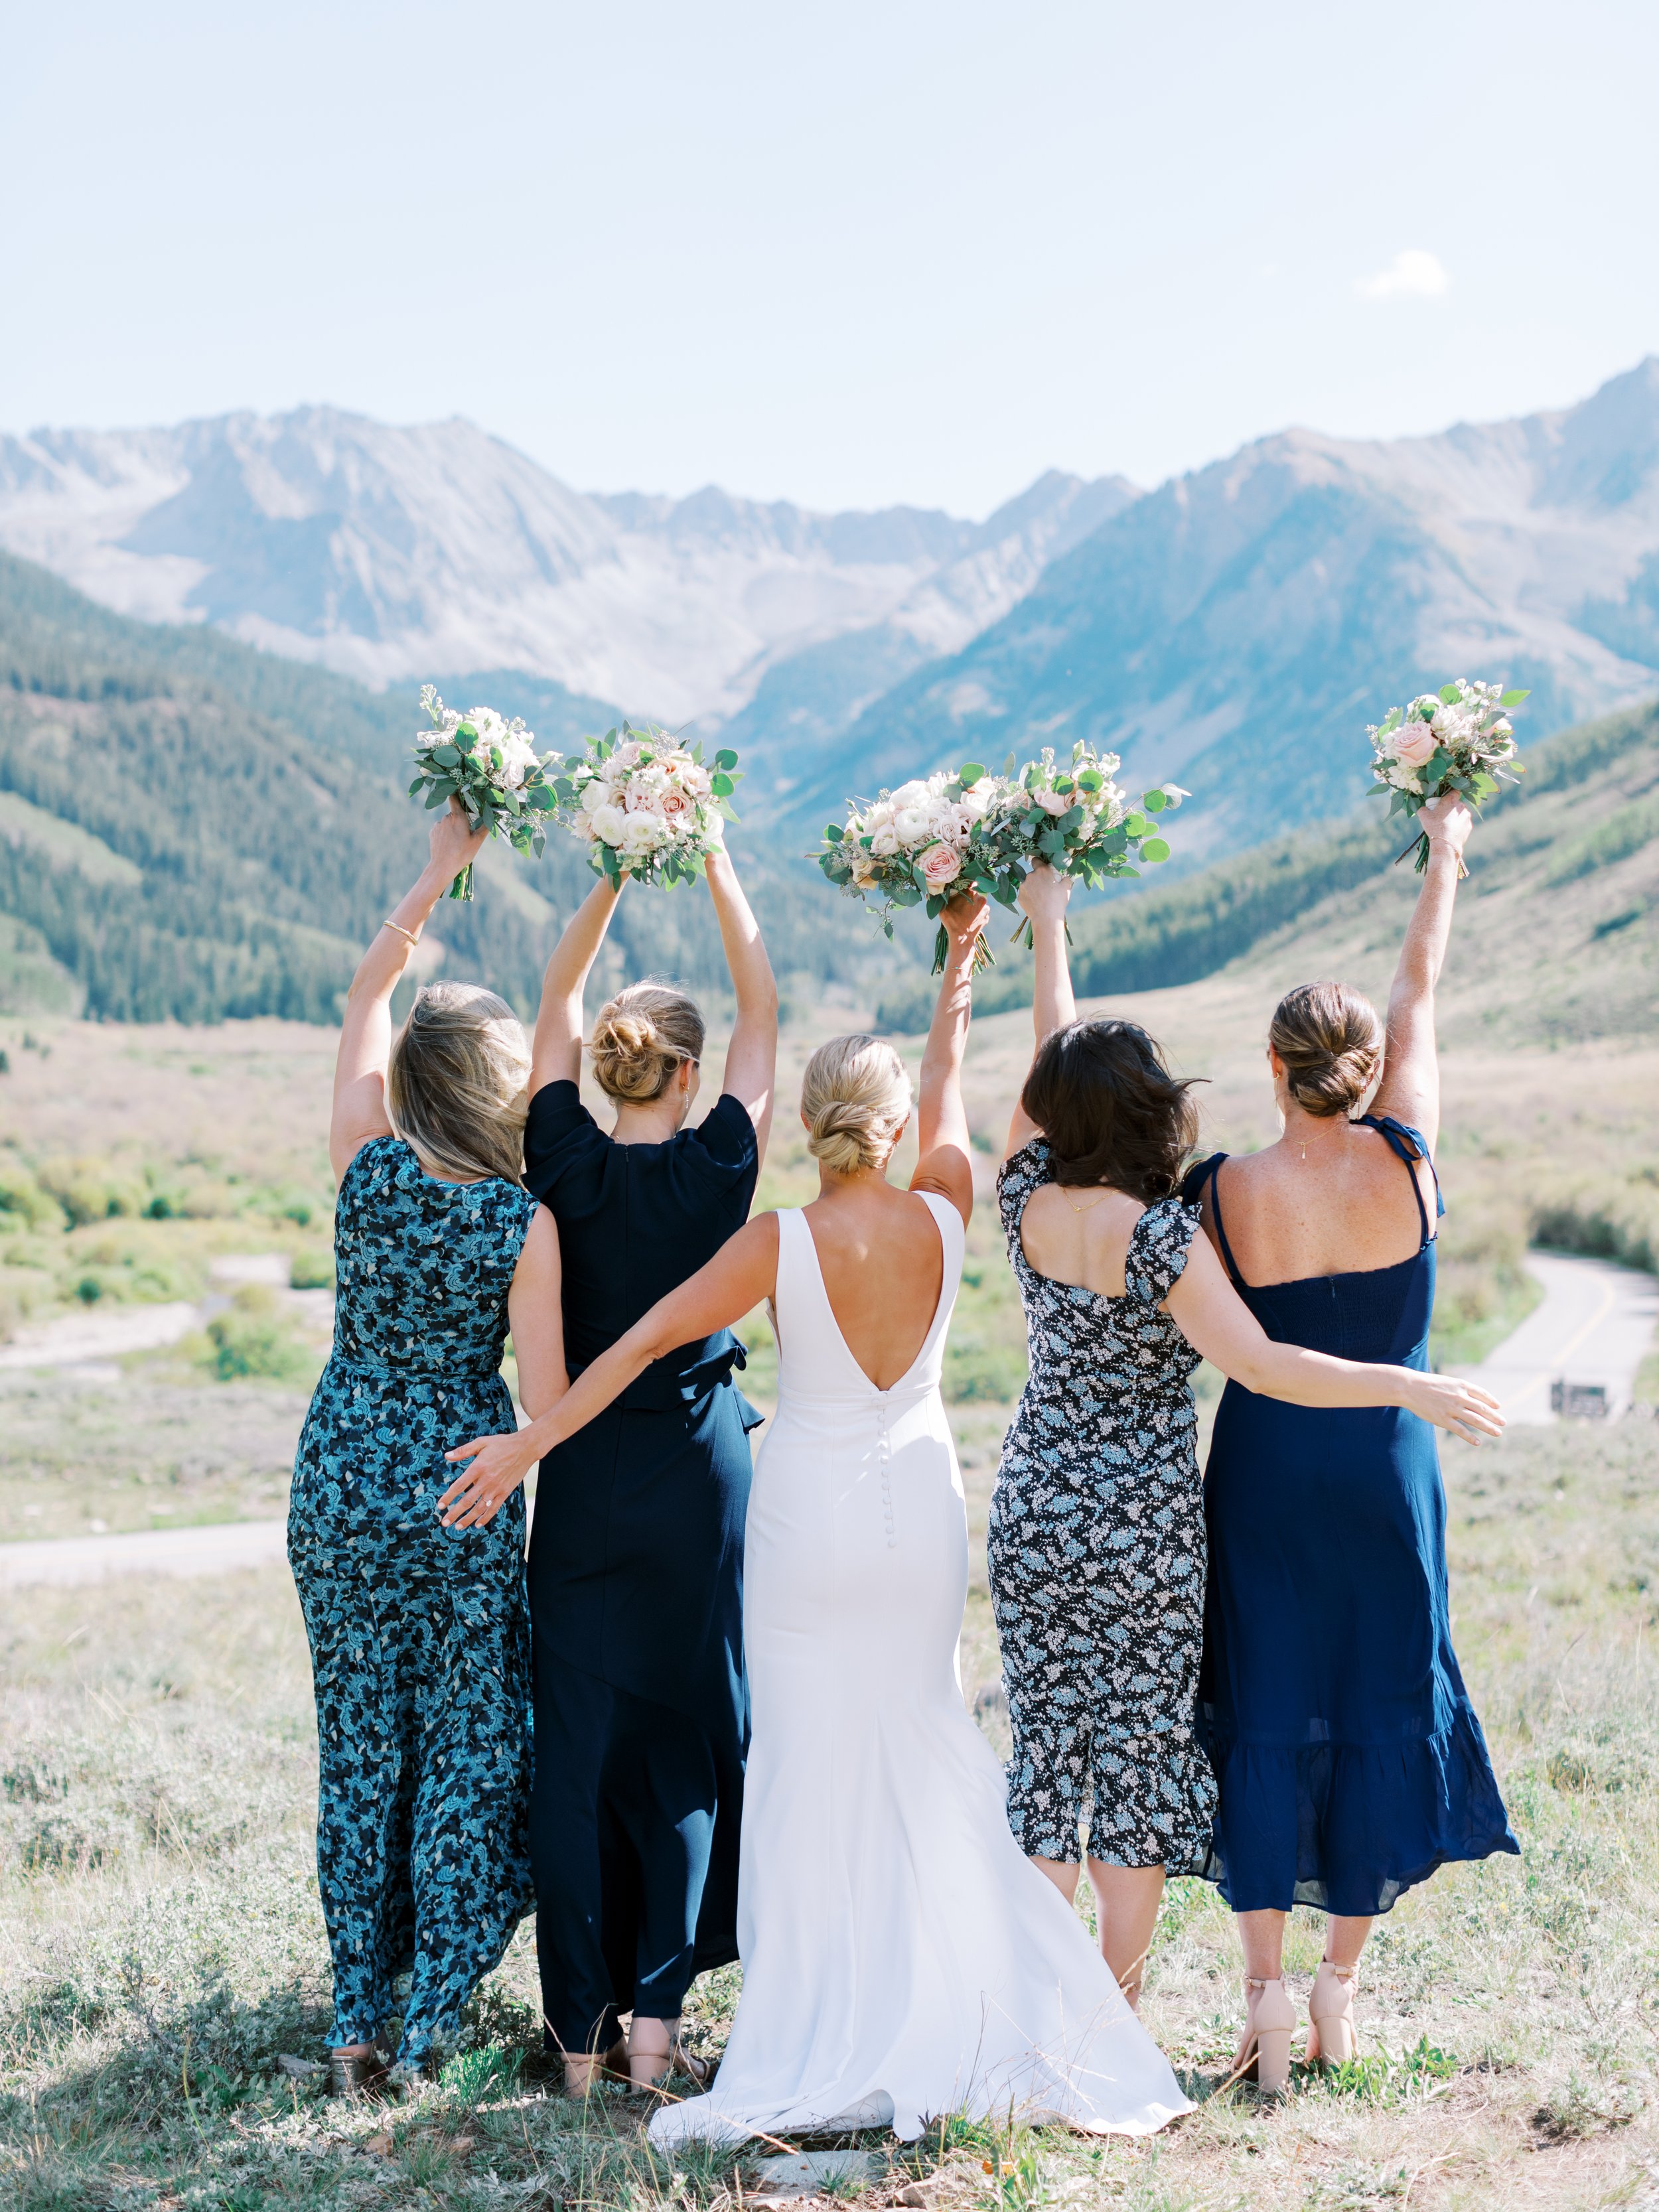 aspen wedding with blue color theme for bridesmaids dresses featuring a alyssa kristin chic crepe wedding dress.